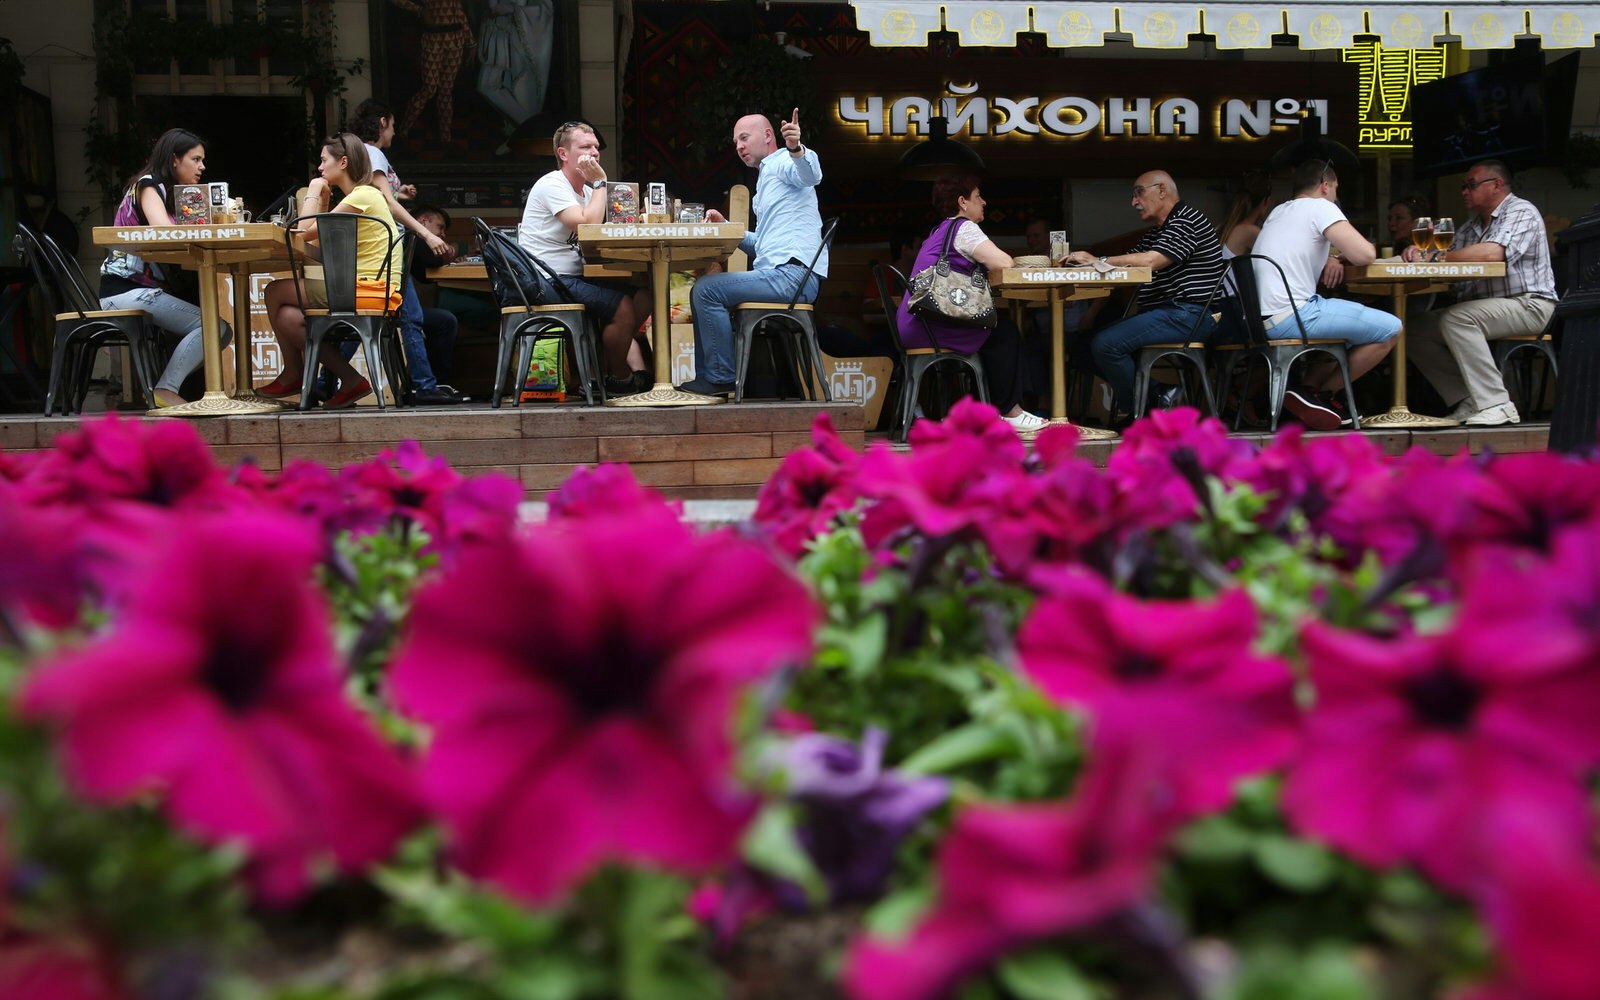 A sidewalk cafe in central Moscow © Vyacheslav Prokofyev / TASS / Getty Images